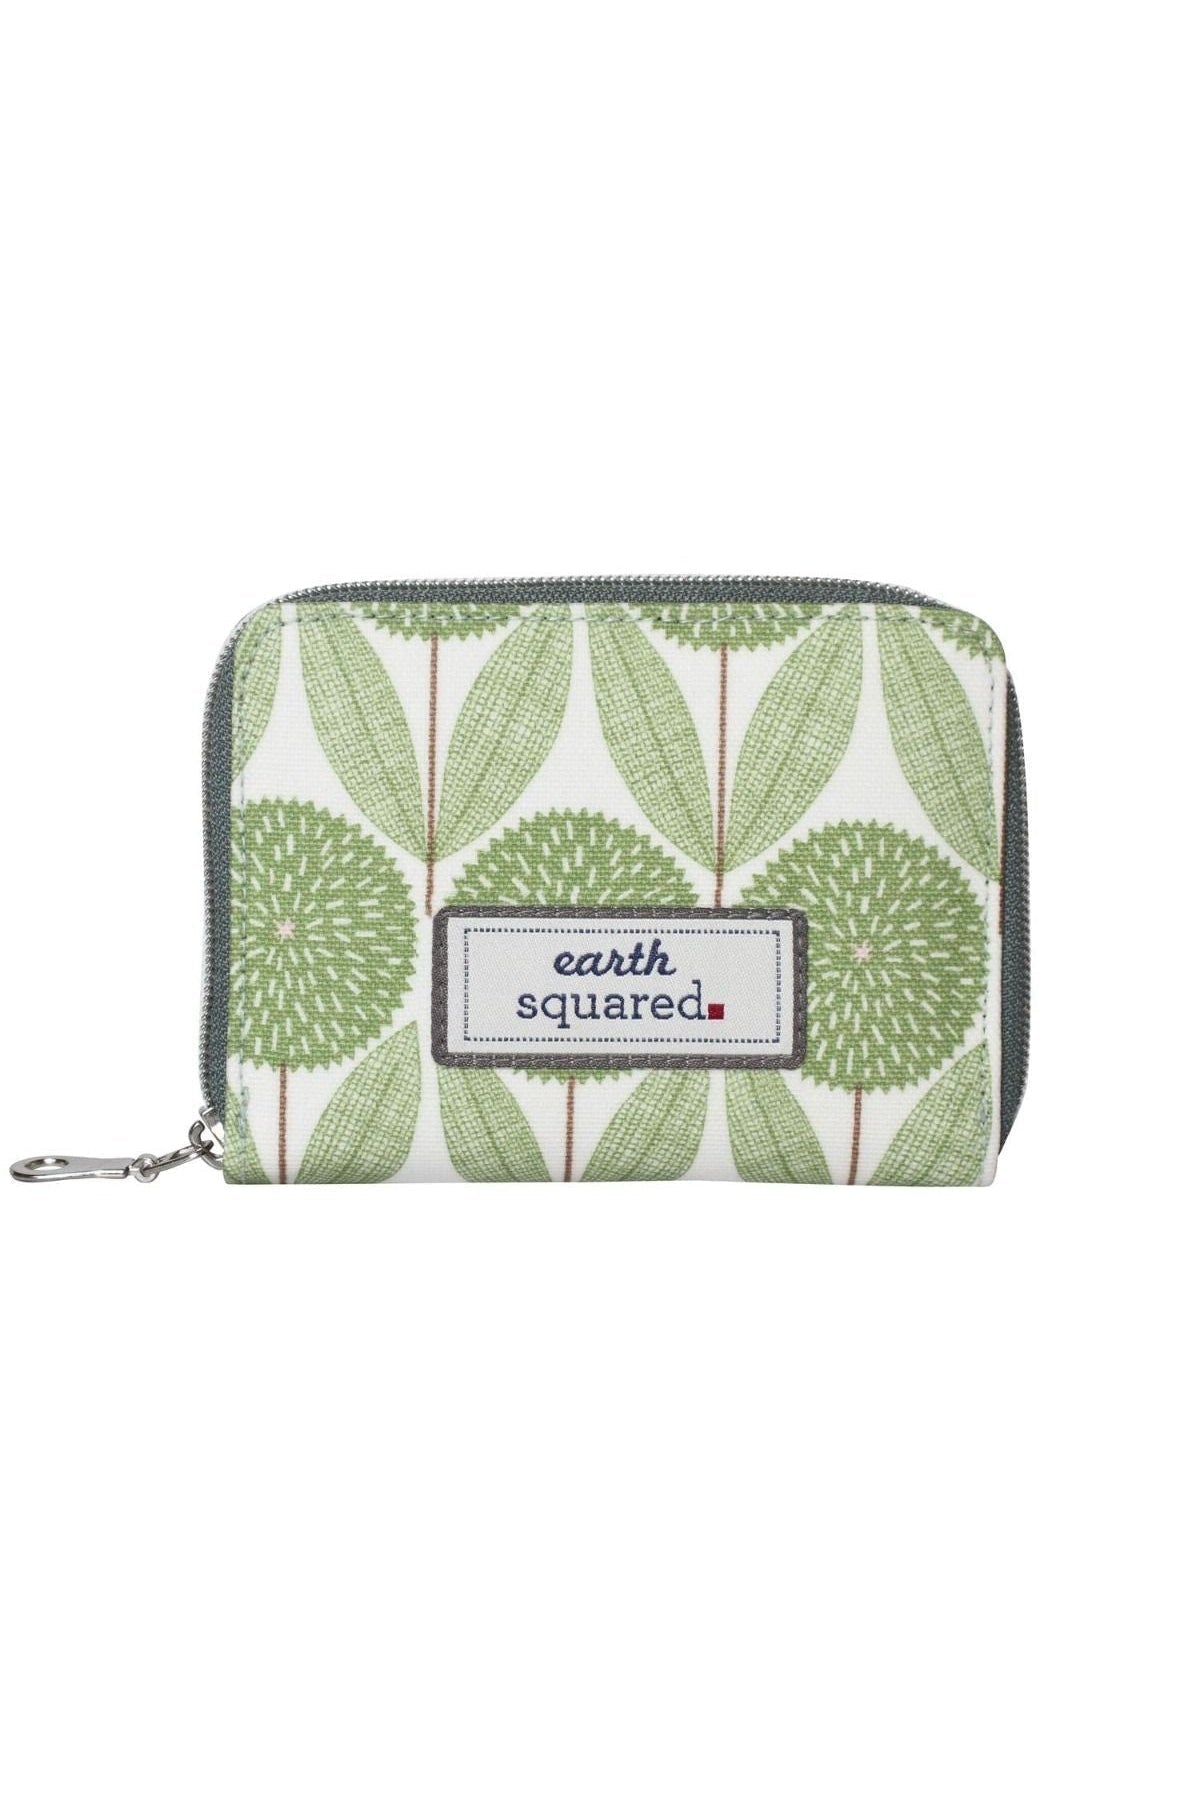 Earth Squared Spring Oil Wallet-Accessories-Ohh! By Gum - Shop Sustainable